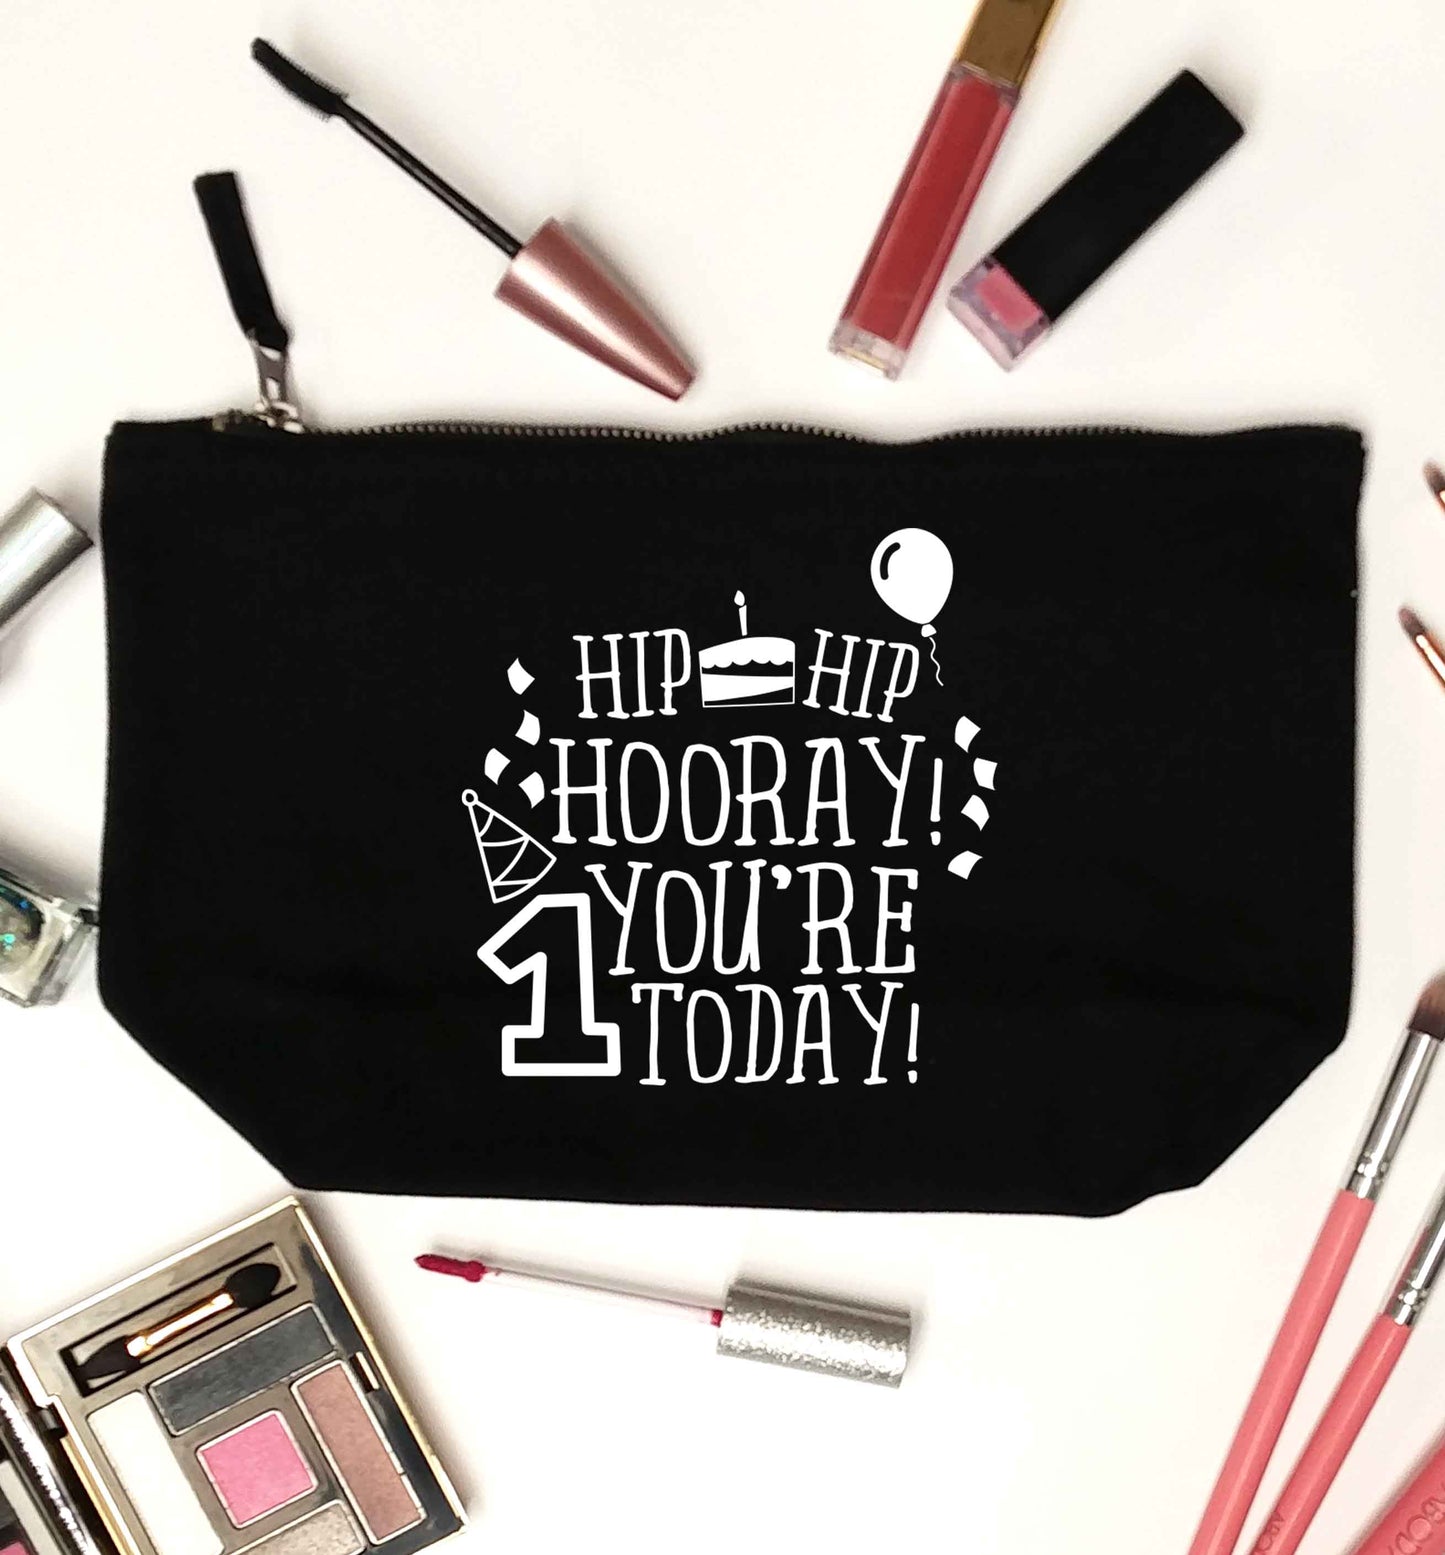 You're one today black makeup bag